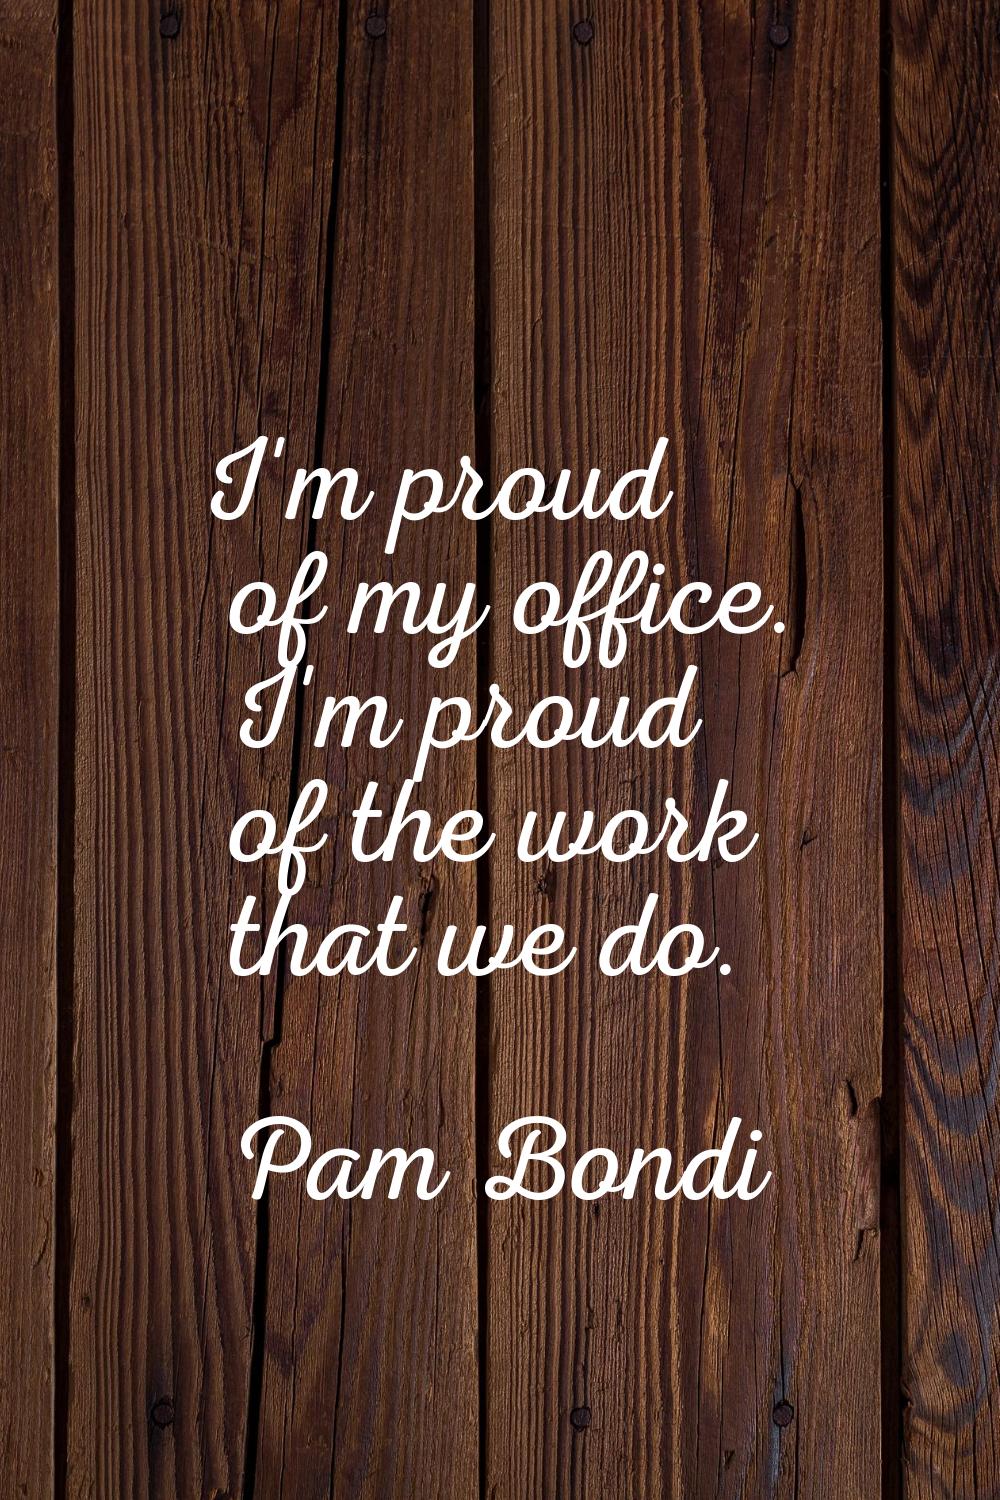 I'm proud of my office. I'm proud of the work that we do.